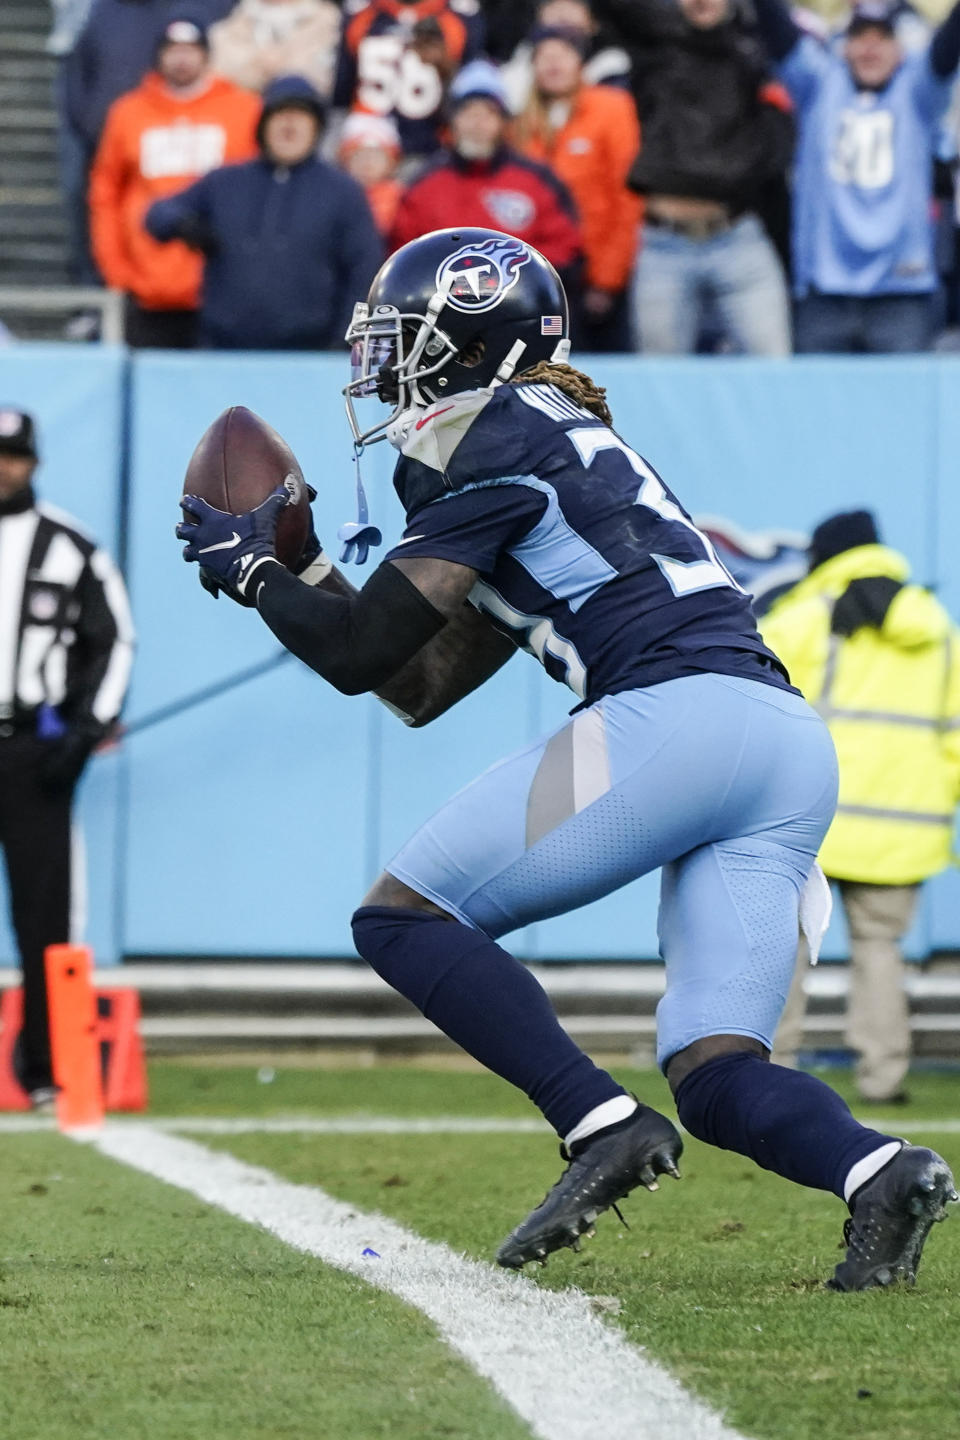 Tennessee Titans cornerback Terrance Mitchell (39) makes the pick against the Denver Broncos during the second half of an NFL football game, Sunday, Nov. 13, 2022, in Nashville, Tenn. The Tennessee Titans won 17-10. (AP Photo/Mark Humphrey)